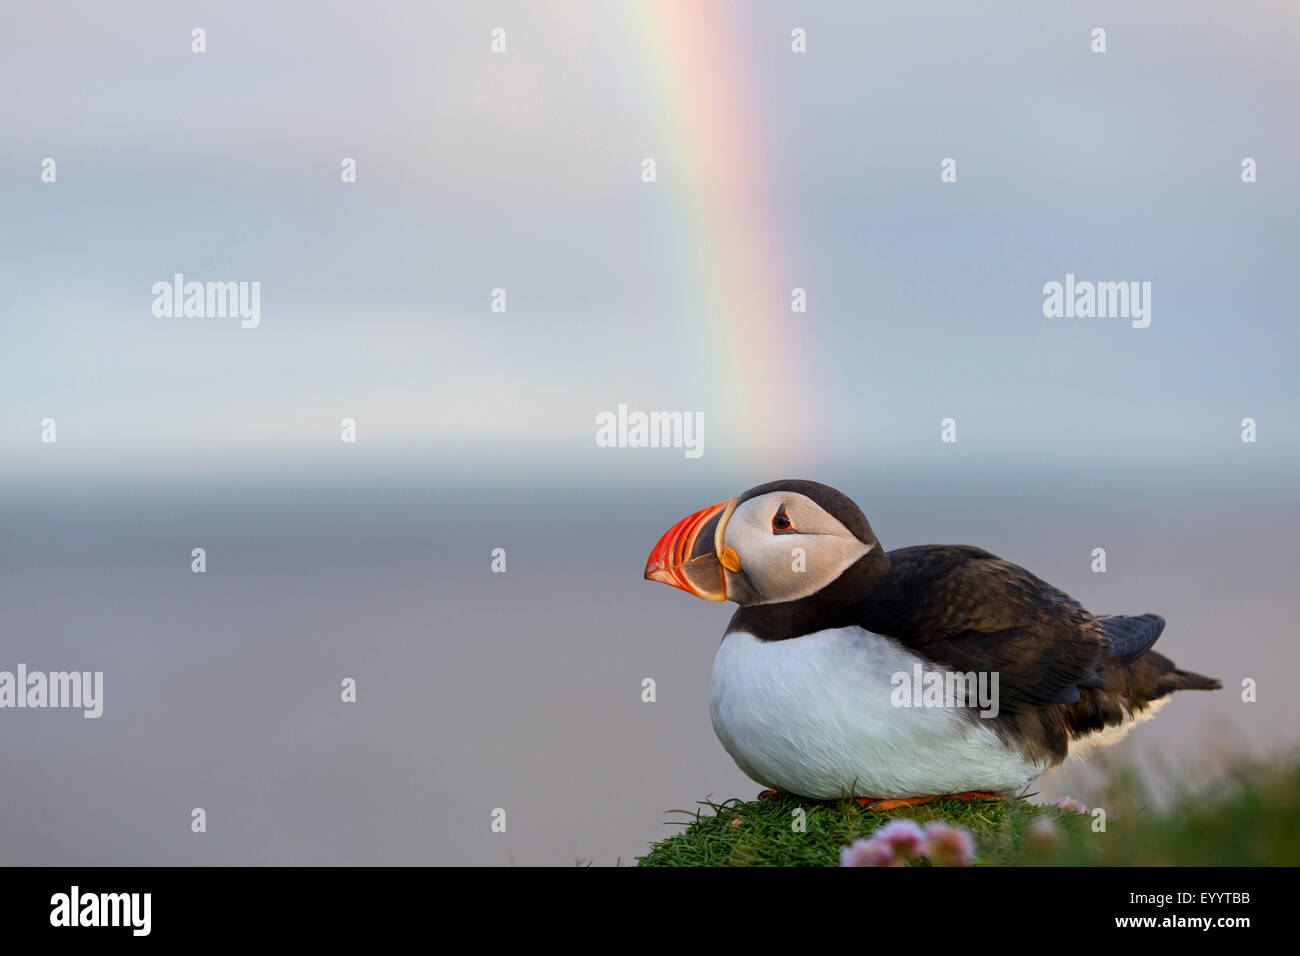 Atlantic puffin, Common puffin (Fratercula arctica), Common puffin lying on a hill, in the background a rainbow, Iceland, Vestfirdir, Hvallaetur Stock Photo